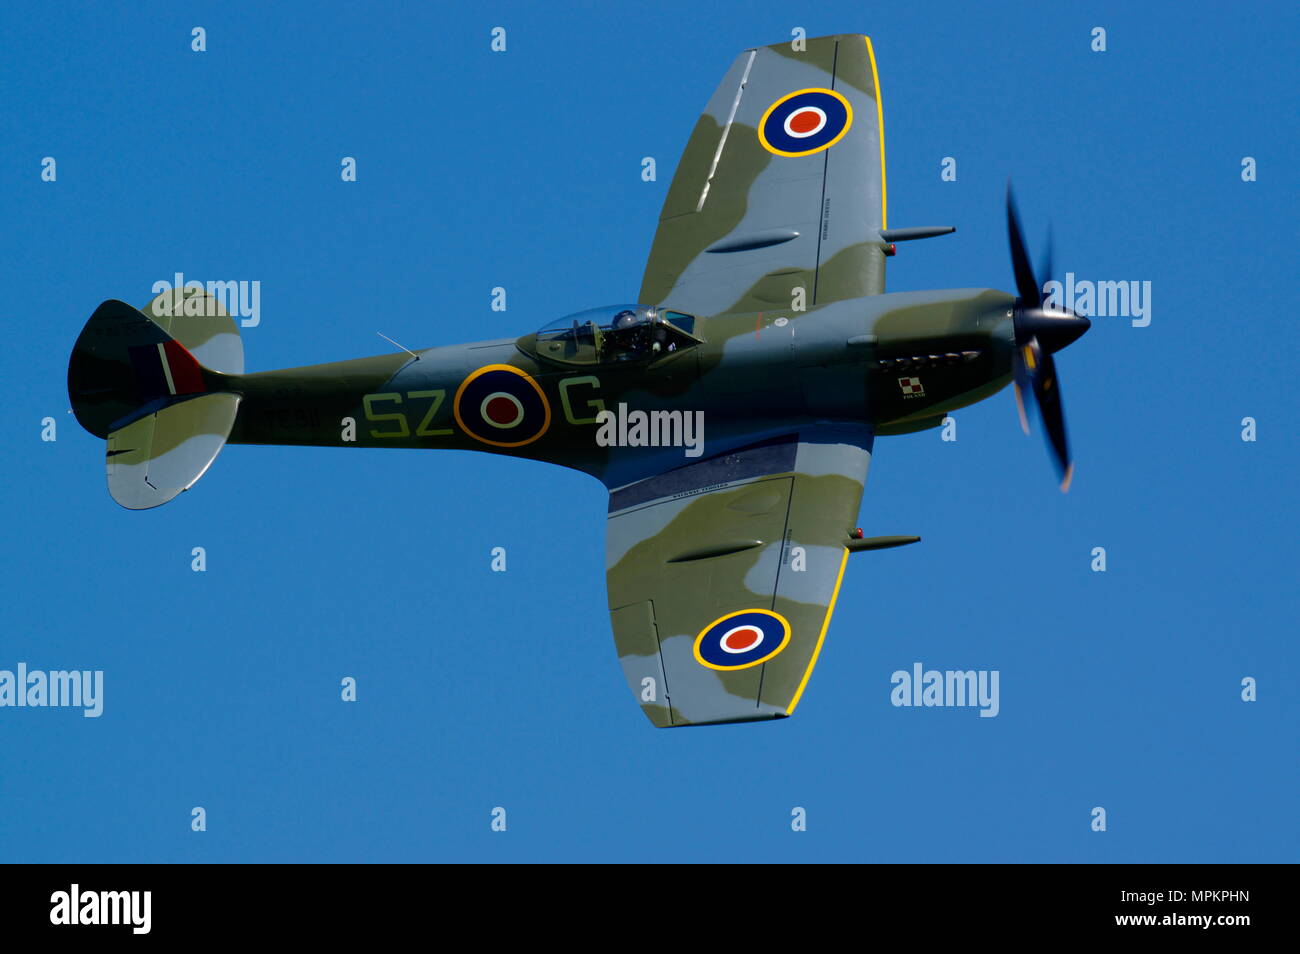 Vickers Supermarine Spitfire Mk XV!, TE311 à Old Warden, Banque D'Images